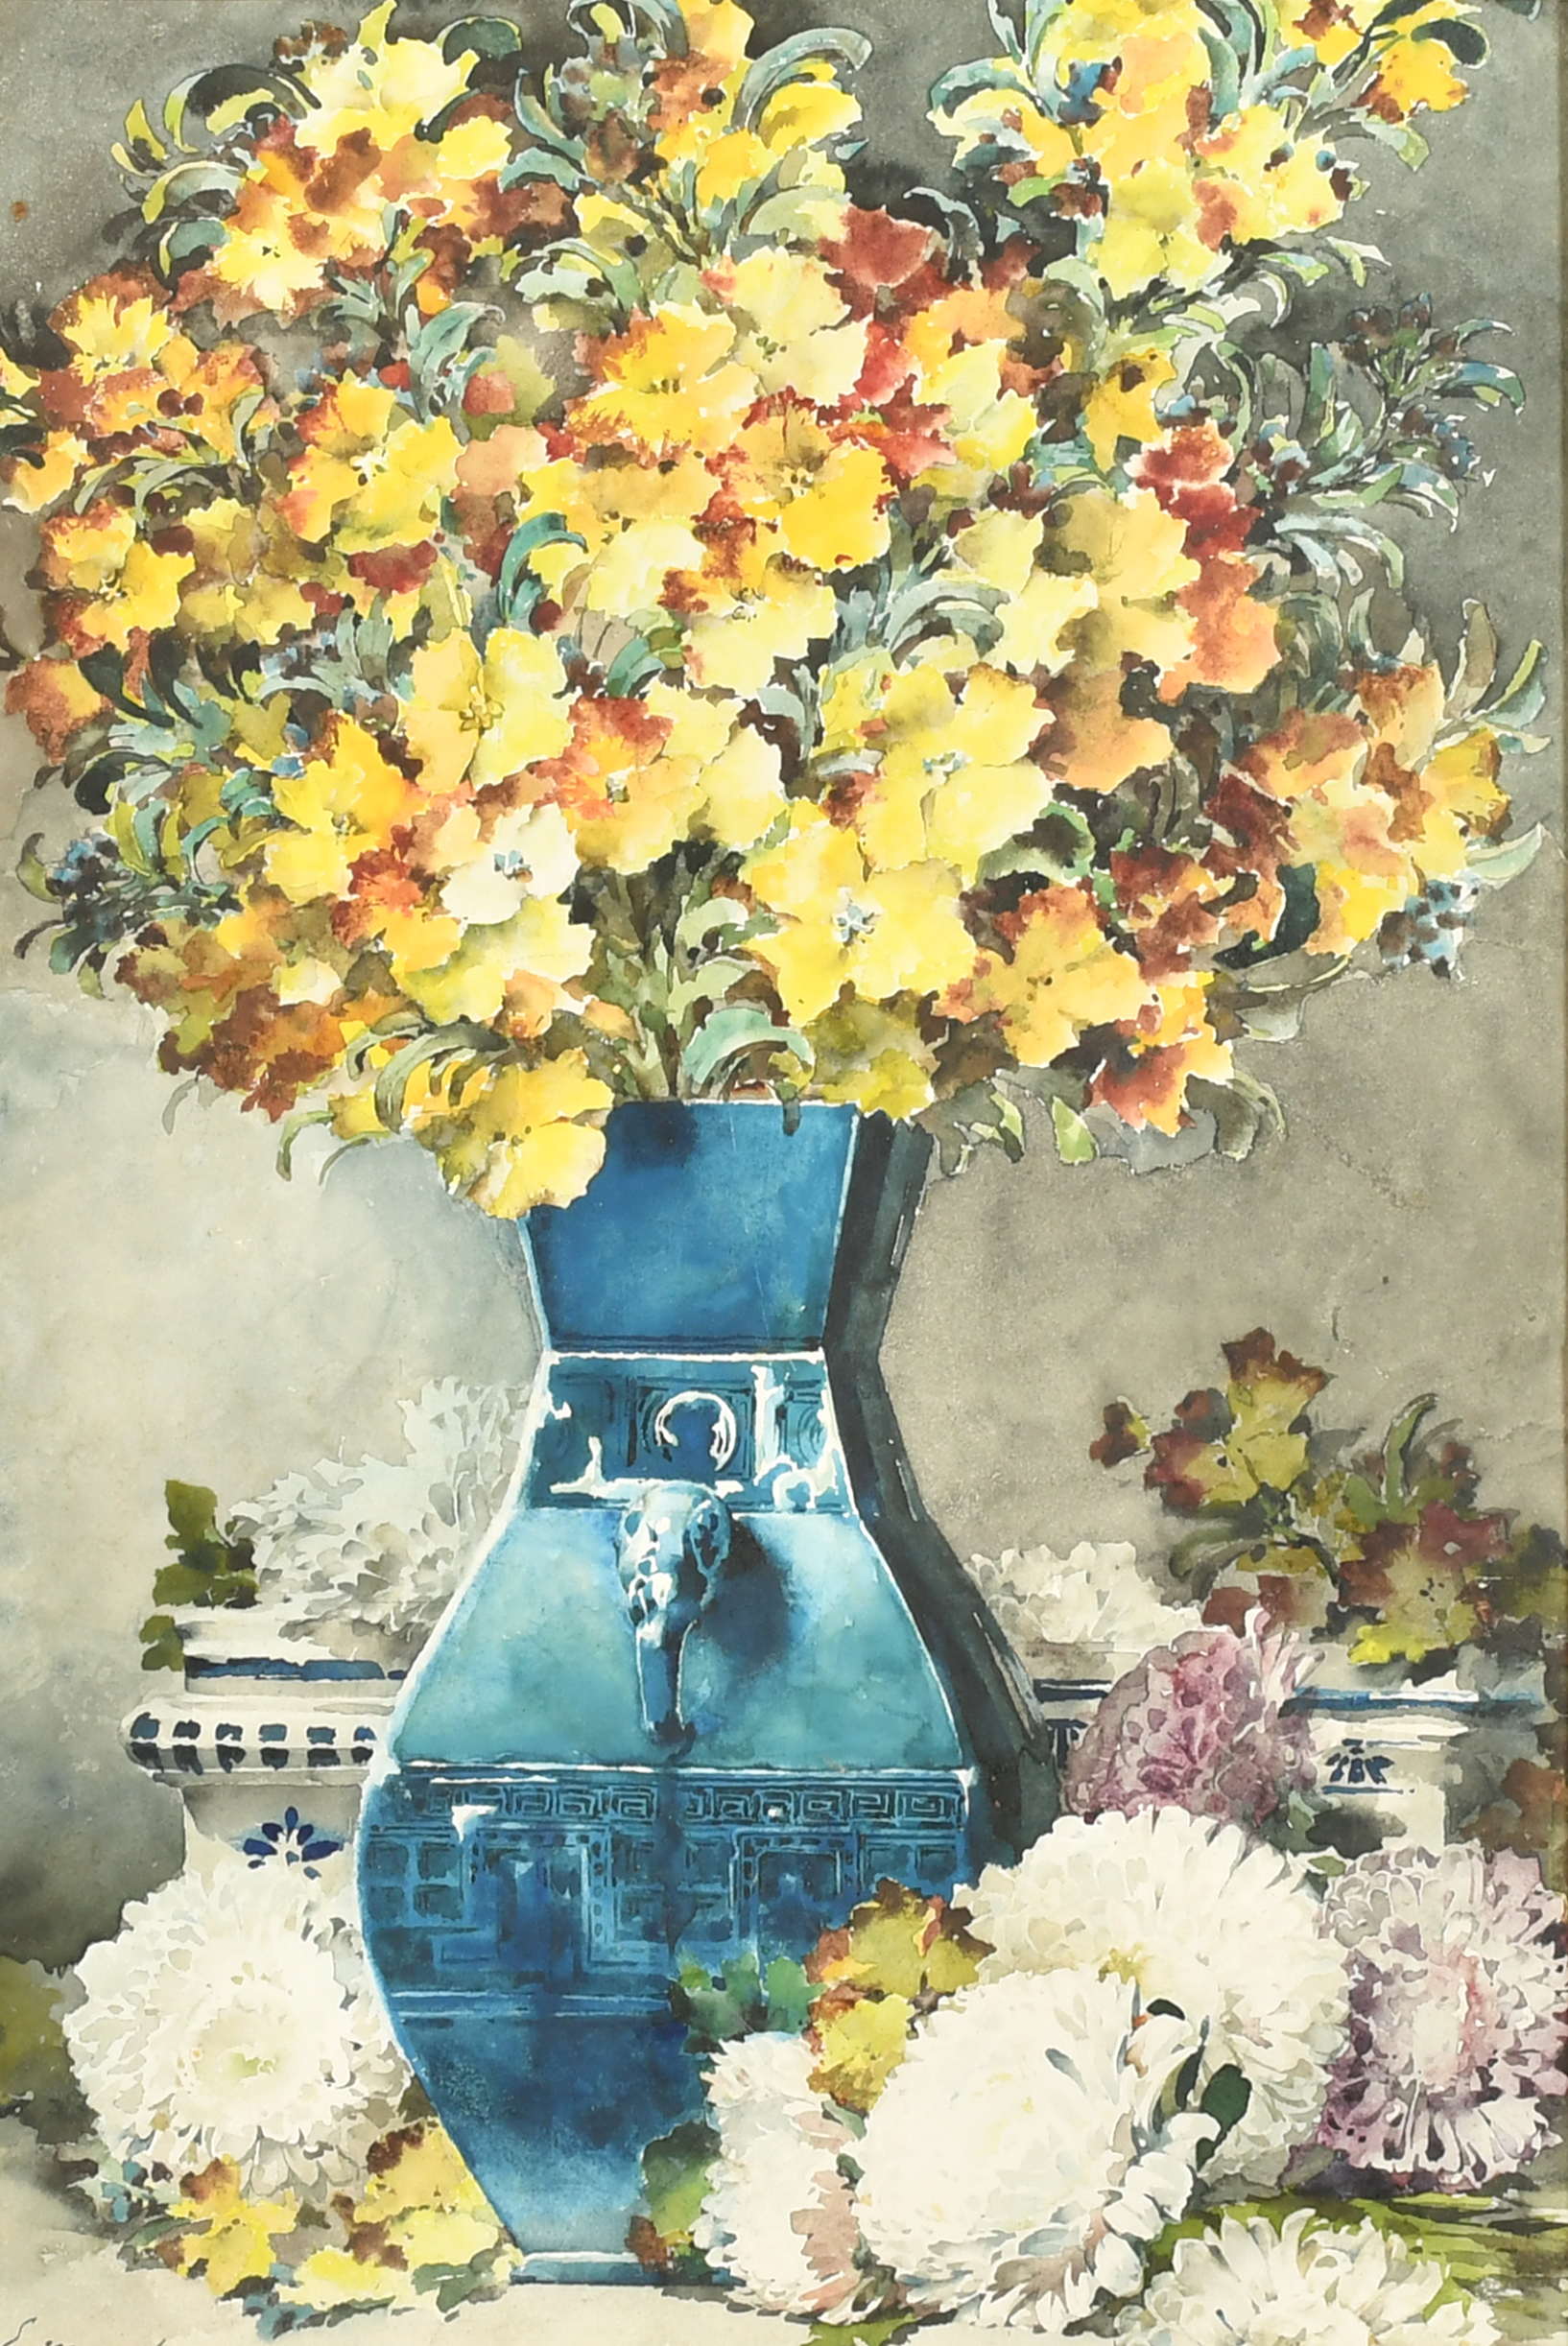 Eugene Morand (1855-1930) Russian. Still Life with Flowers in a Blue Vase, Watercolour, Signed, 18"